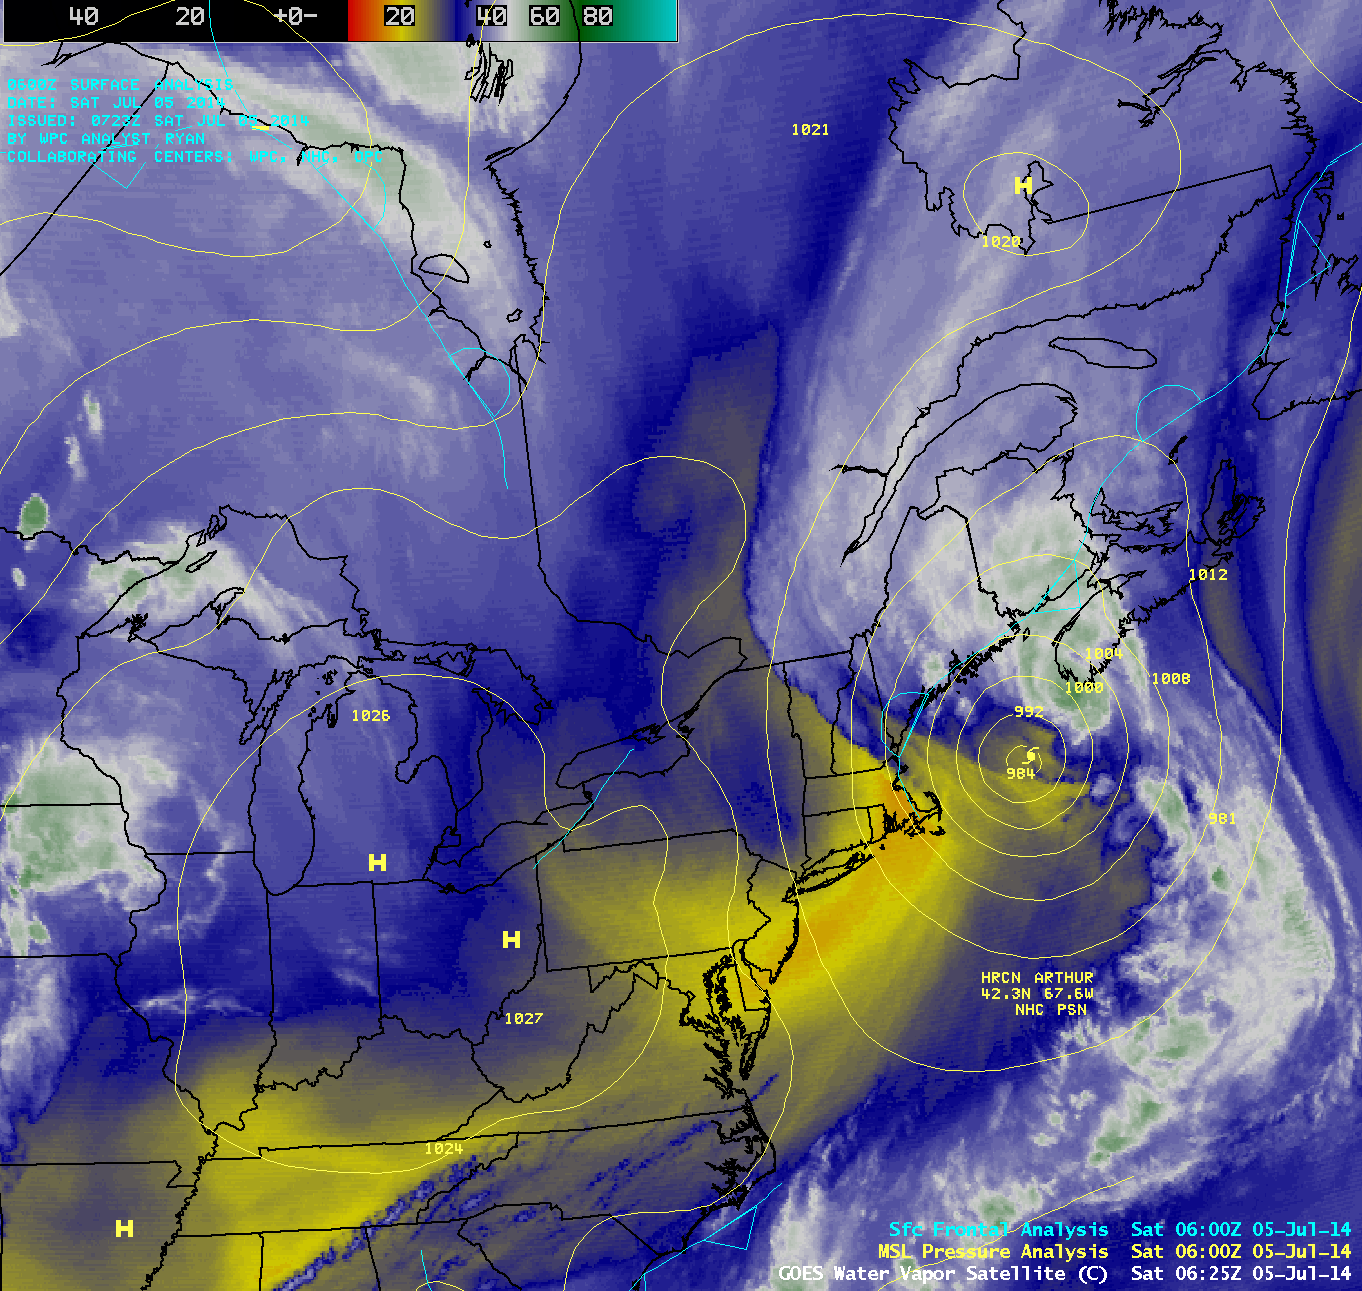 GOES-13 6.5 µm water vapor channel images with surface pressure and frontal analyses